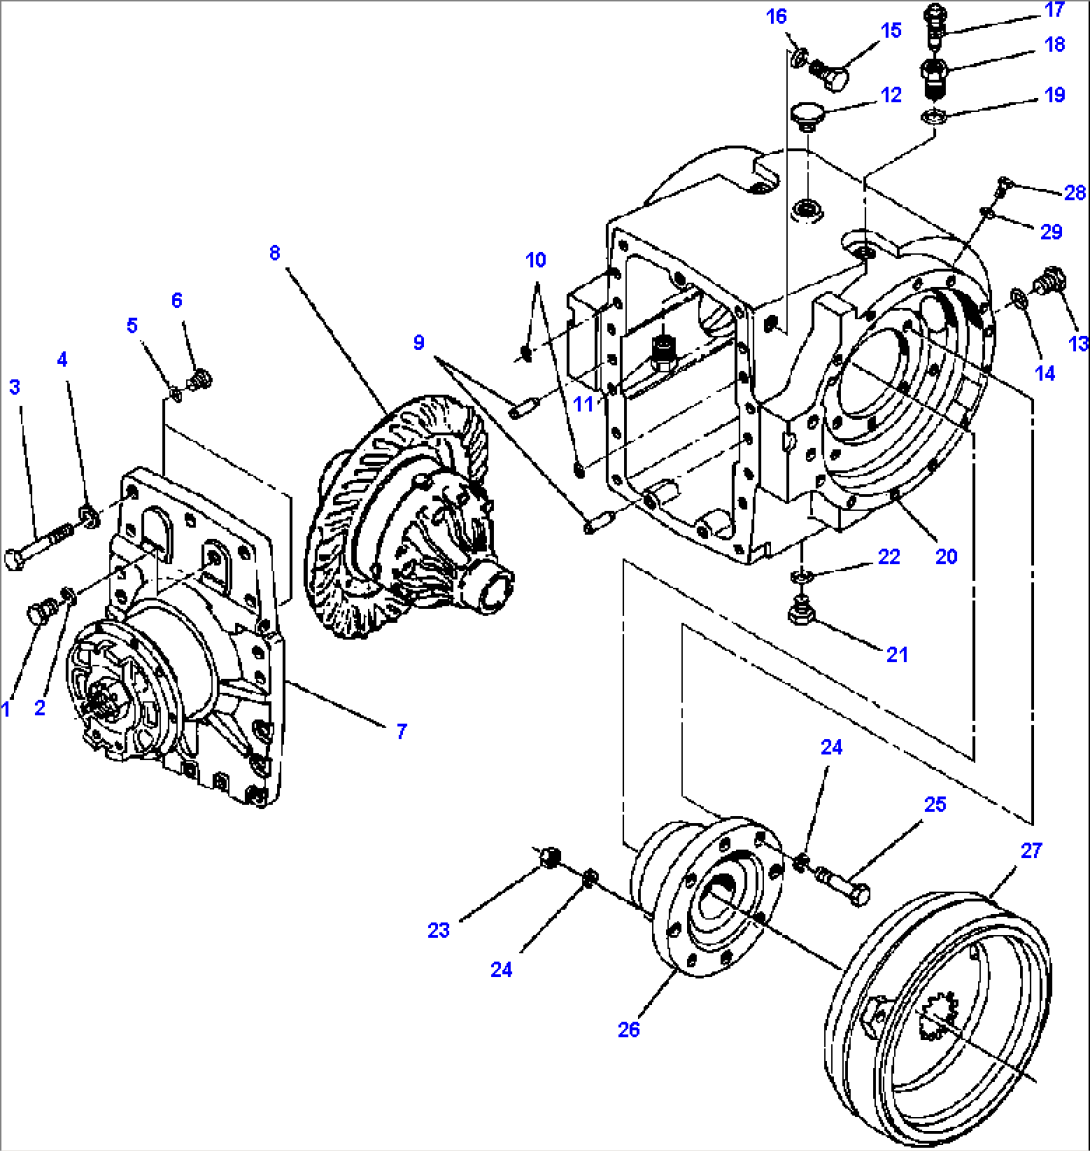 LOCK/UNLOCK DIFFERENTIAL CASE ASSEMBLY